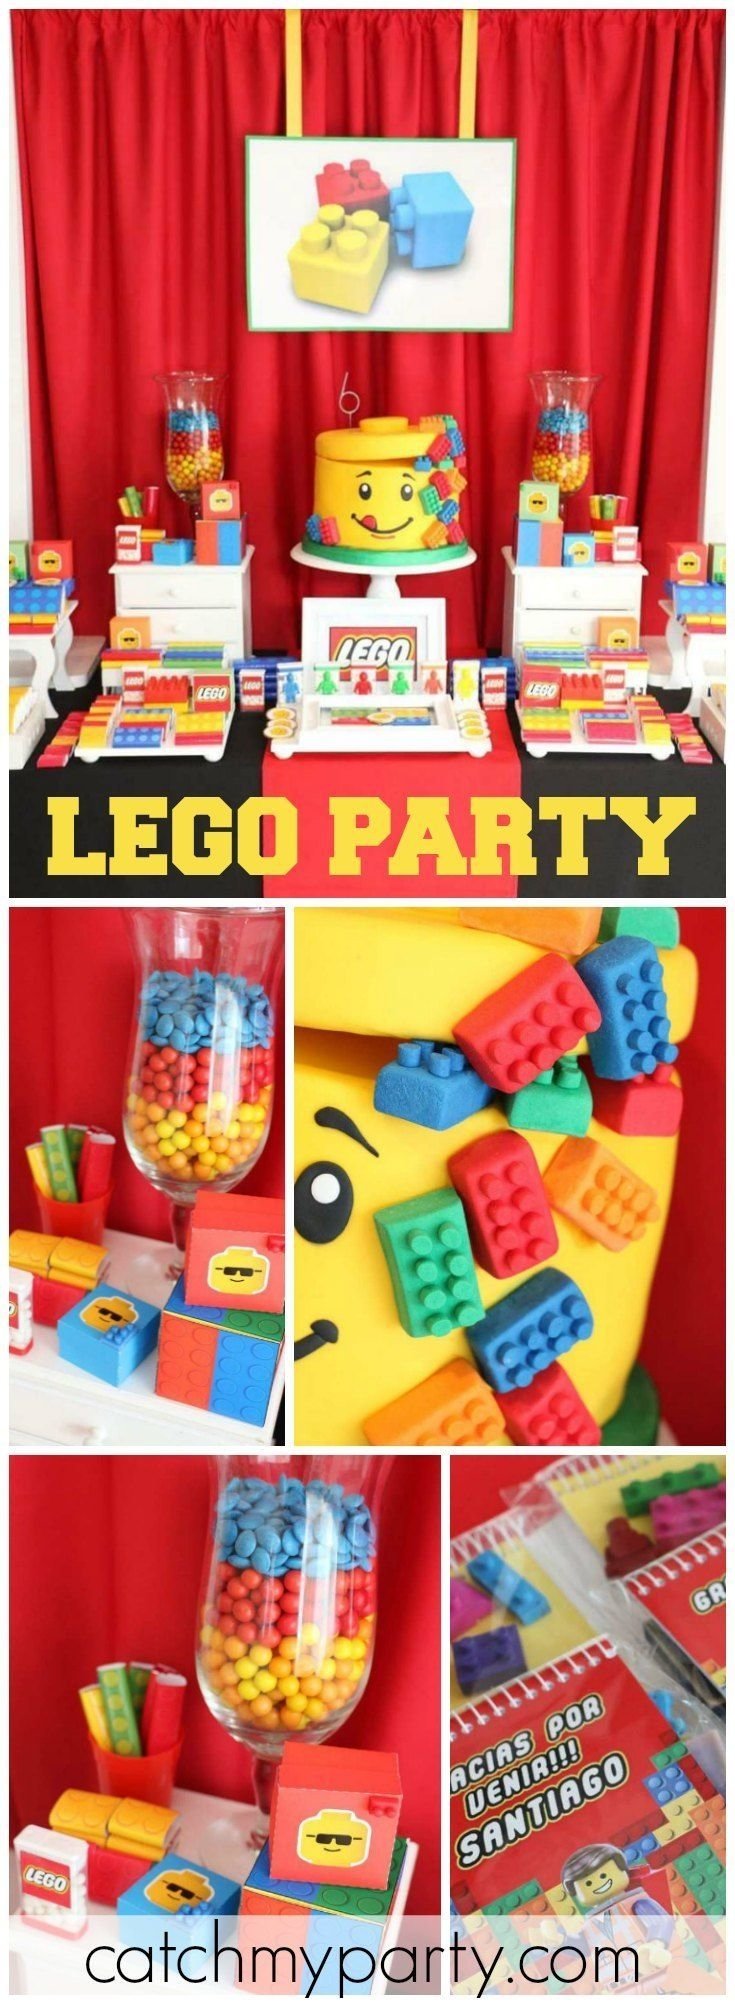 10 Awesome Birthday Ideas For A 5 Year Old Boy legos birthday lego movie party lego man cake man cake and 2023